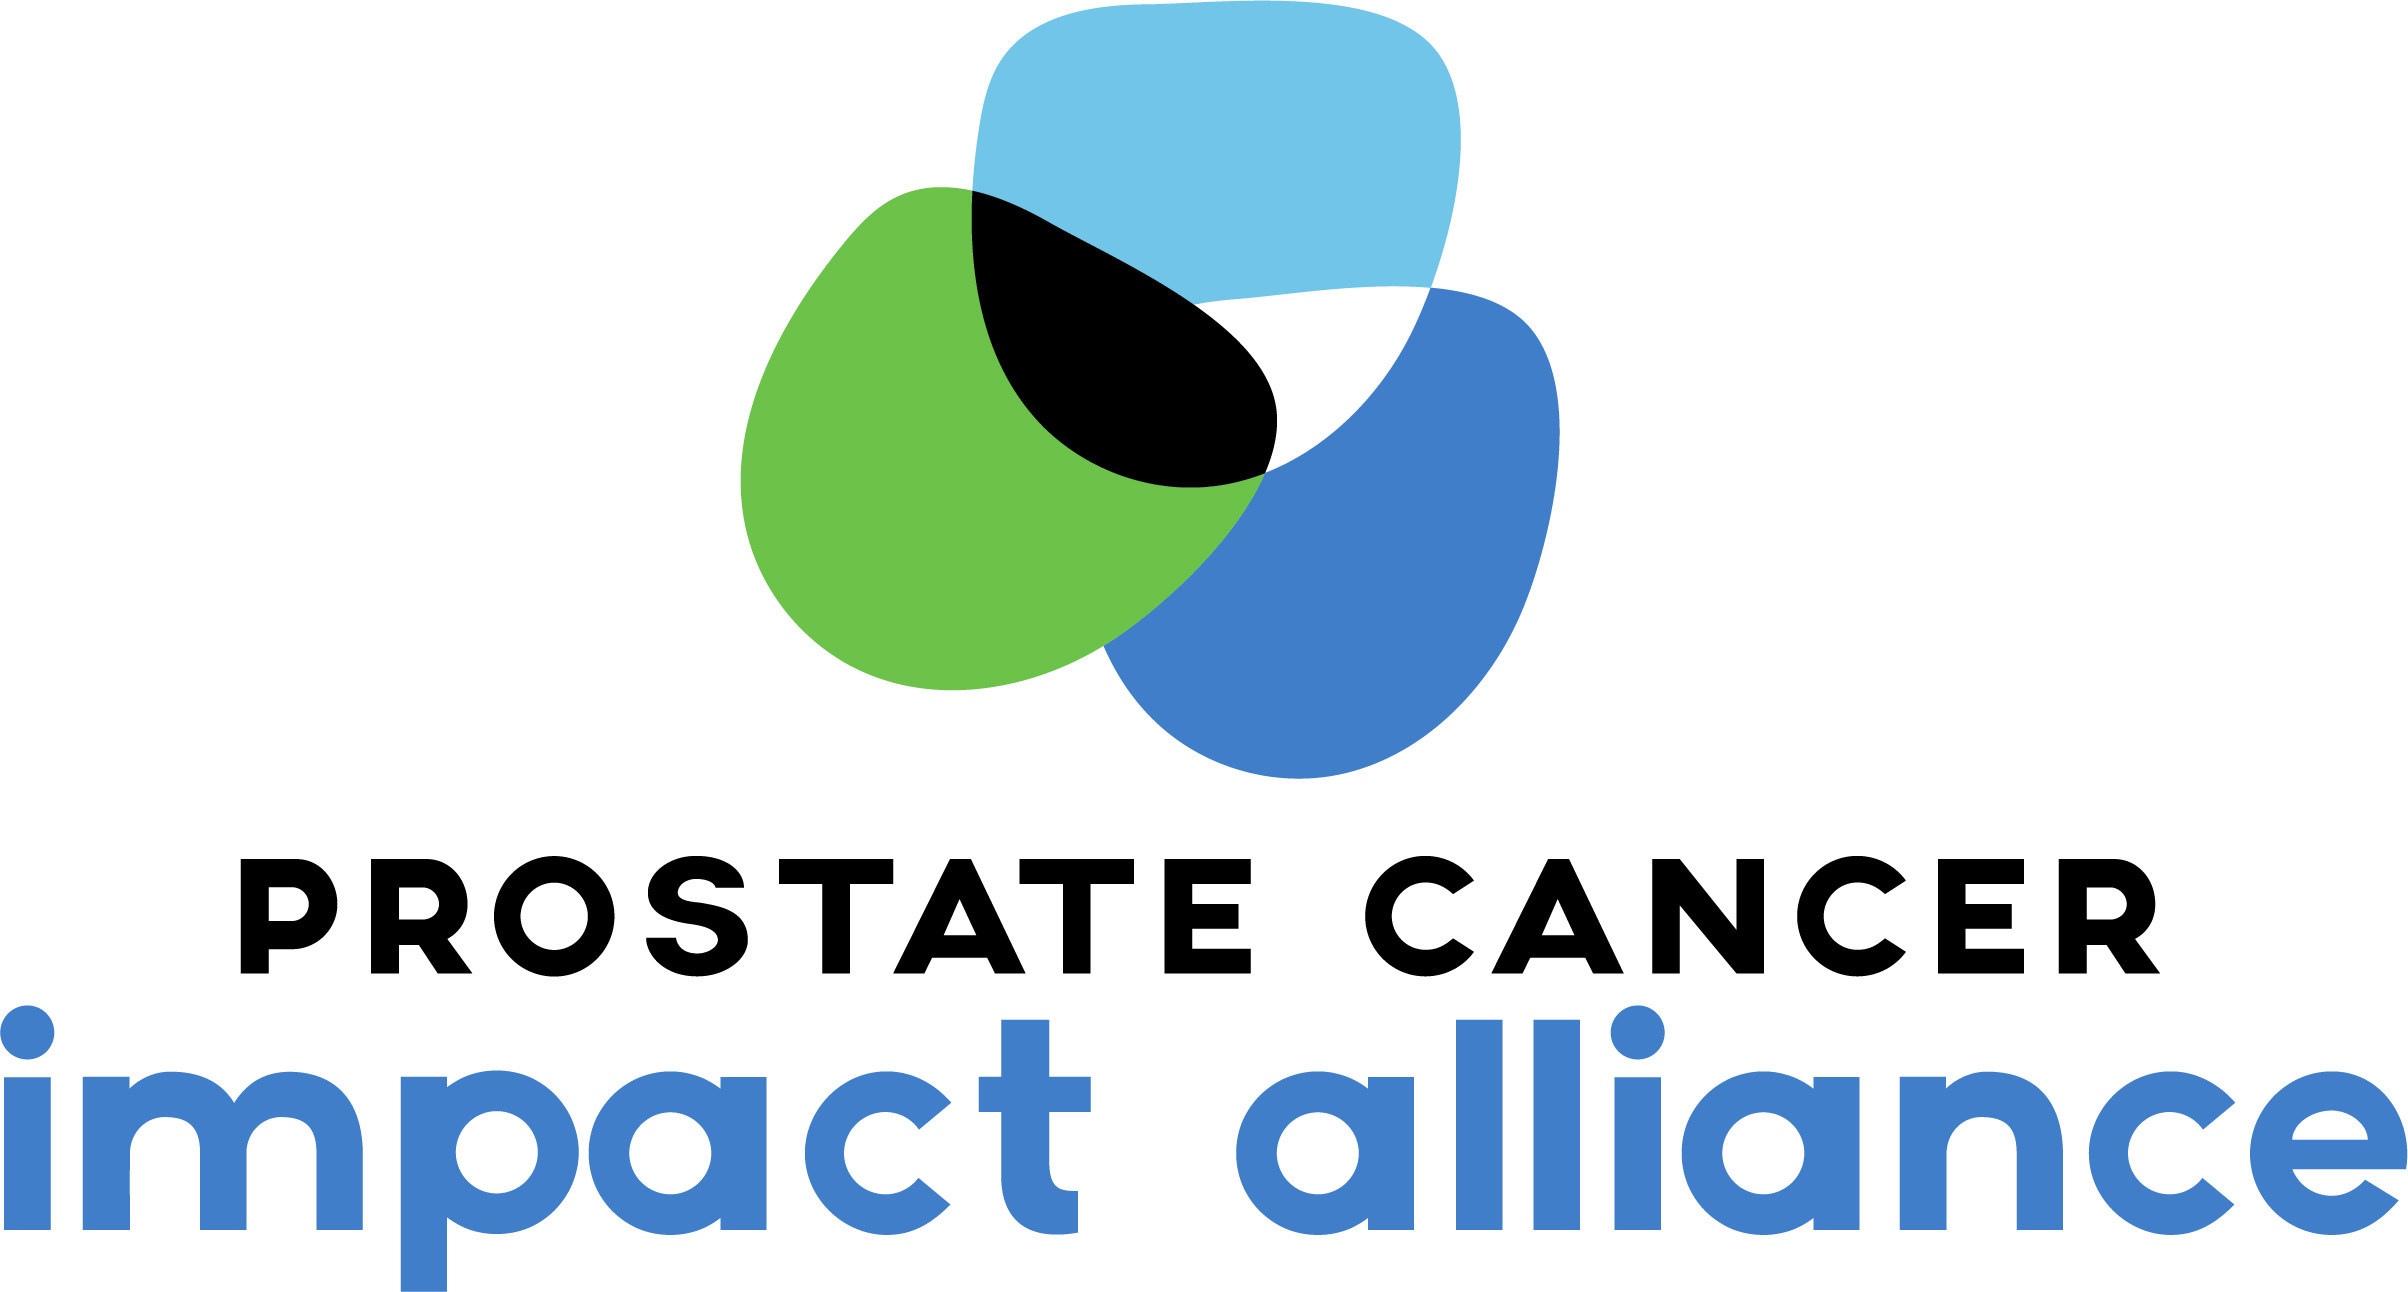 Prostate Cancer Impact Alliance is a collection of diverse stakeholders within the prostate cancer community working together toward increased awareness and access for prostate cancer treatments. The PCIA membership is represented by 28 patient advocacy groups and professional medical and scientific organizations, as well as industry companies. PCIA events and activities are supported in part by funding from industry companies.